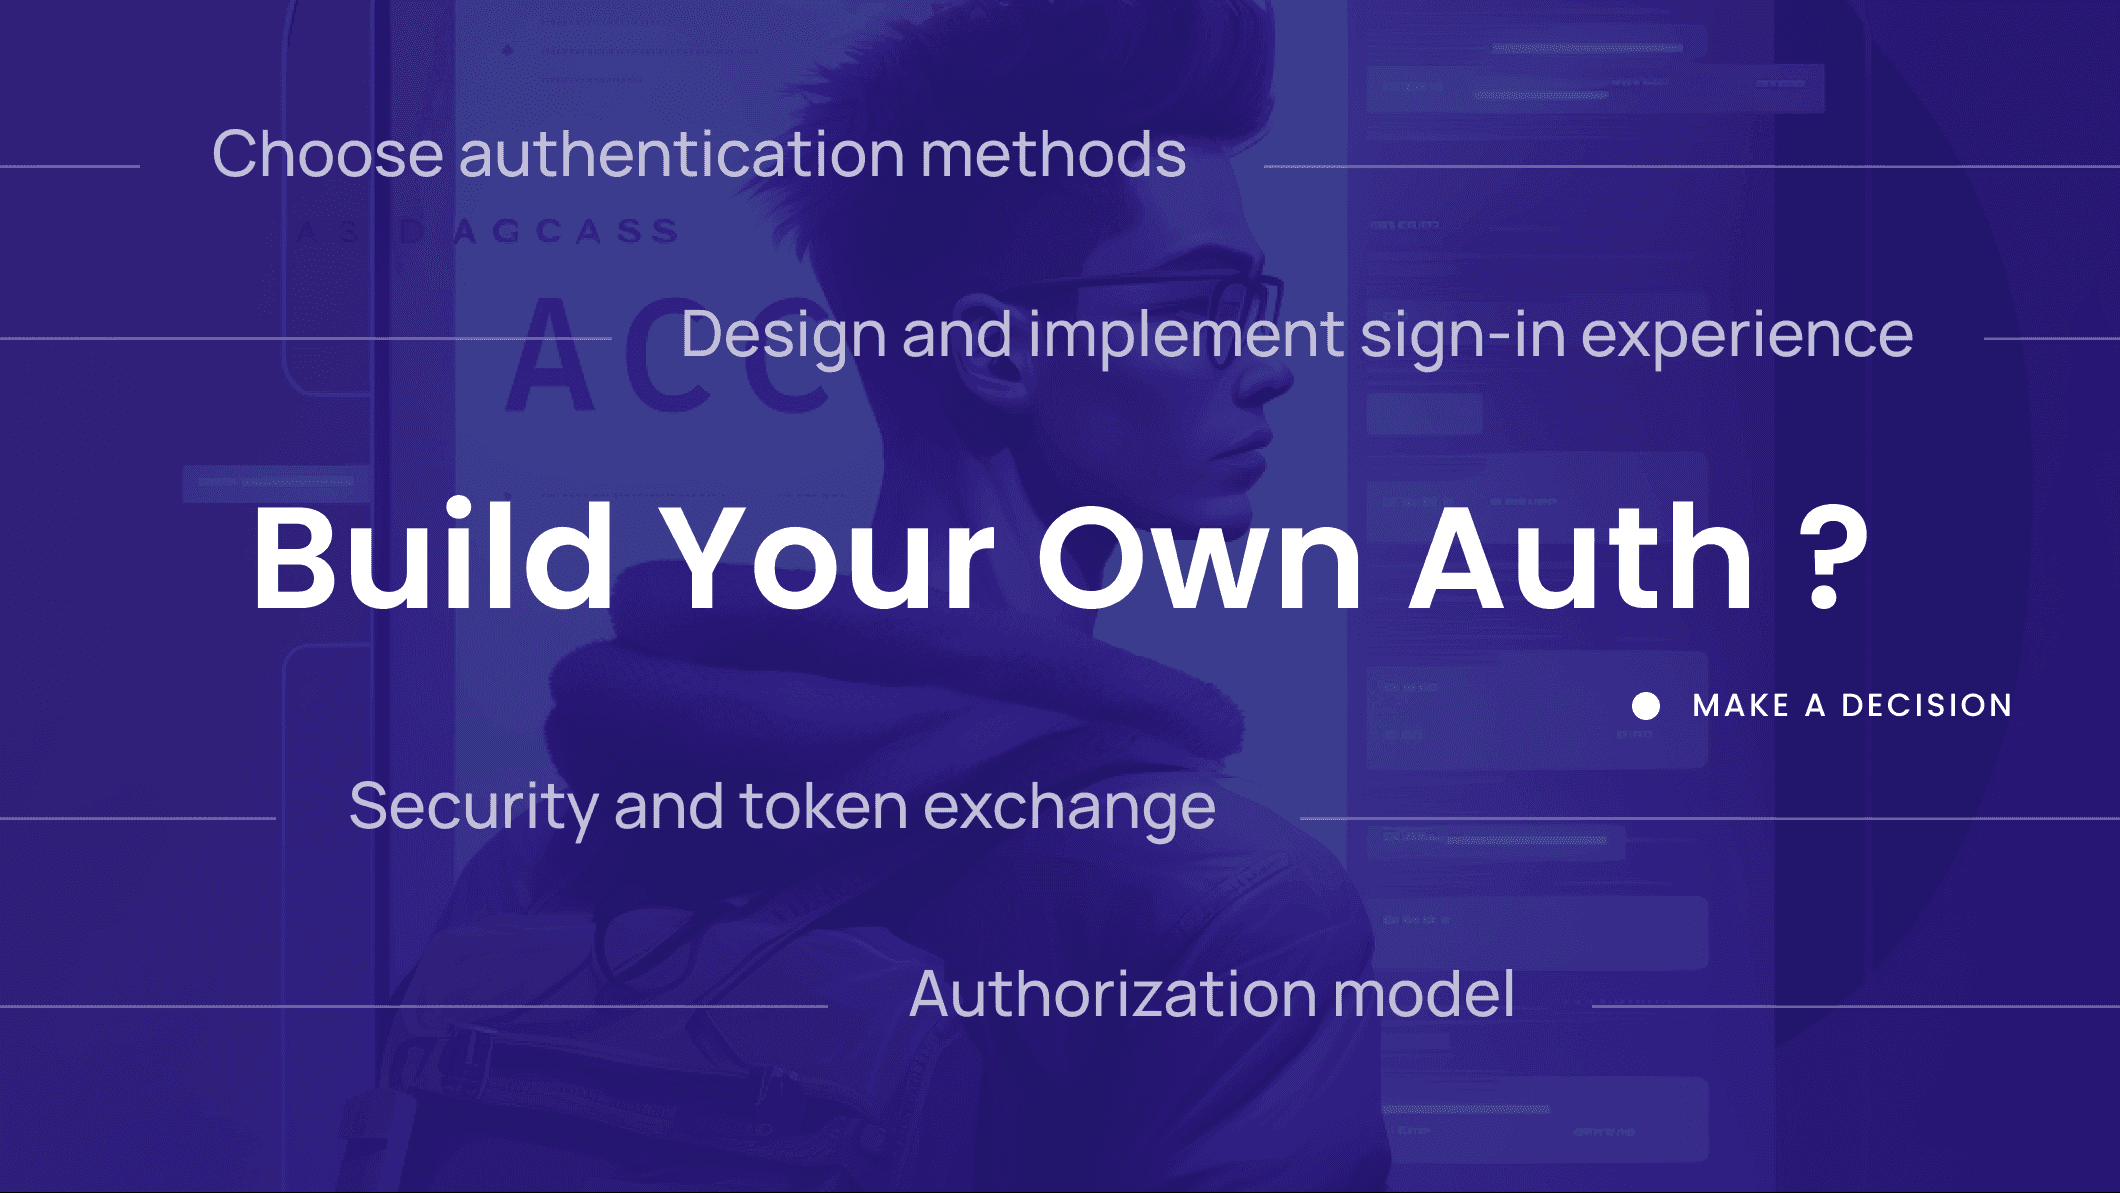 Do you need to build your own auth for apps?